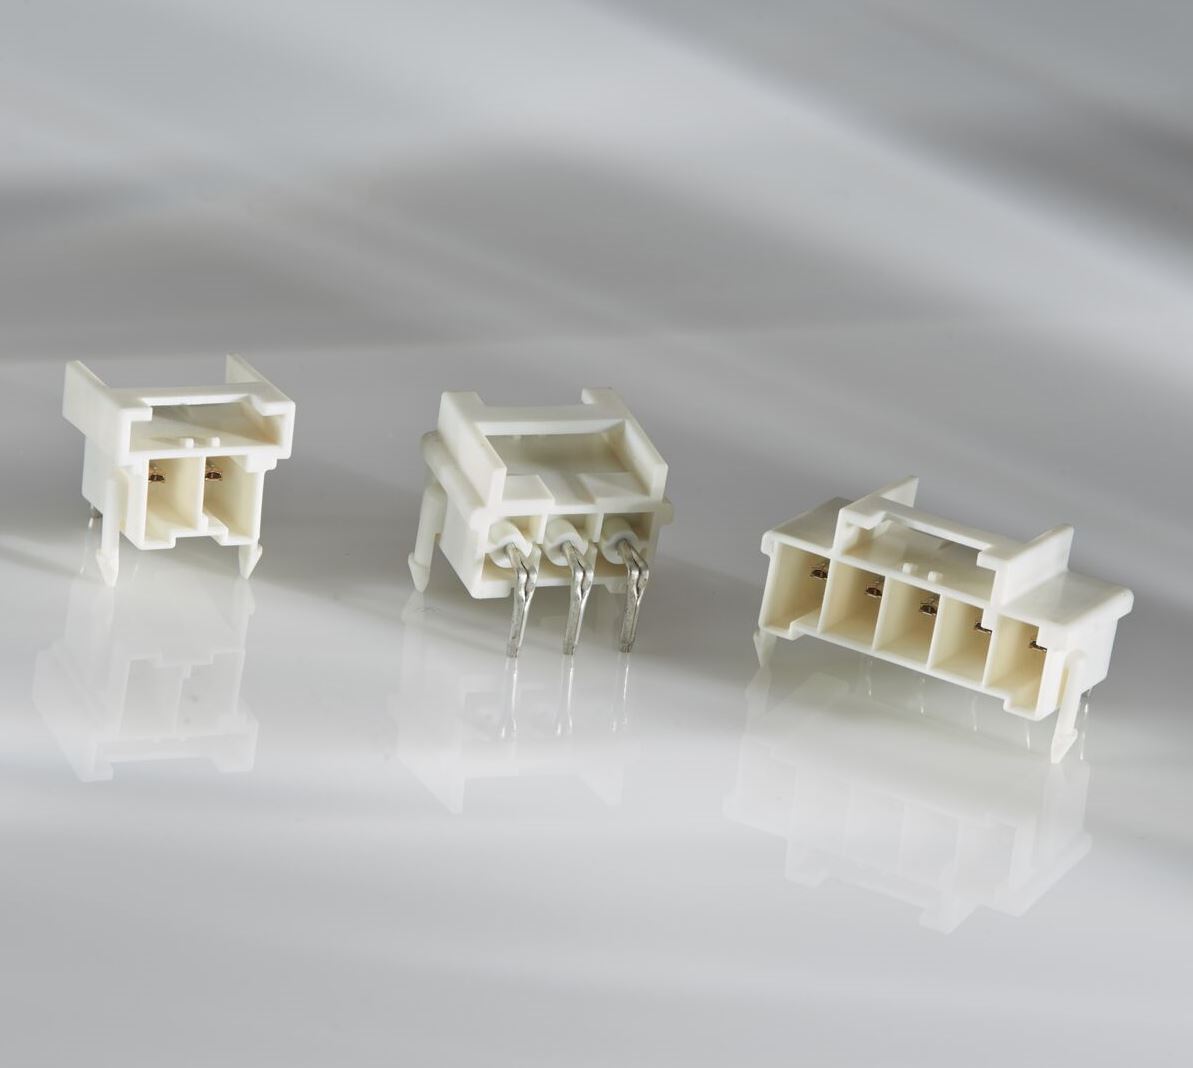 Connector Family Features new Headers for Through-Hole, Printed Circuit Board Applications